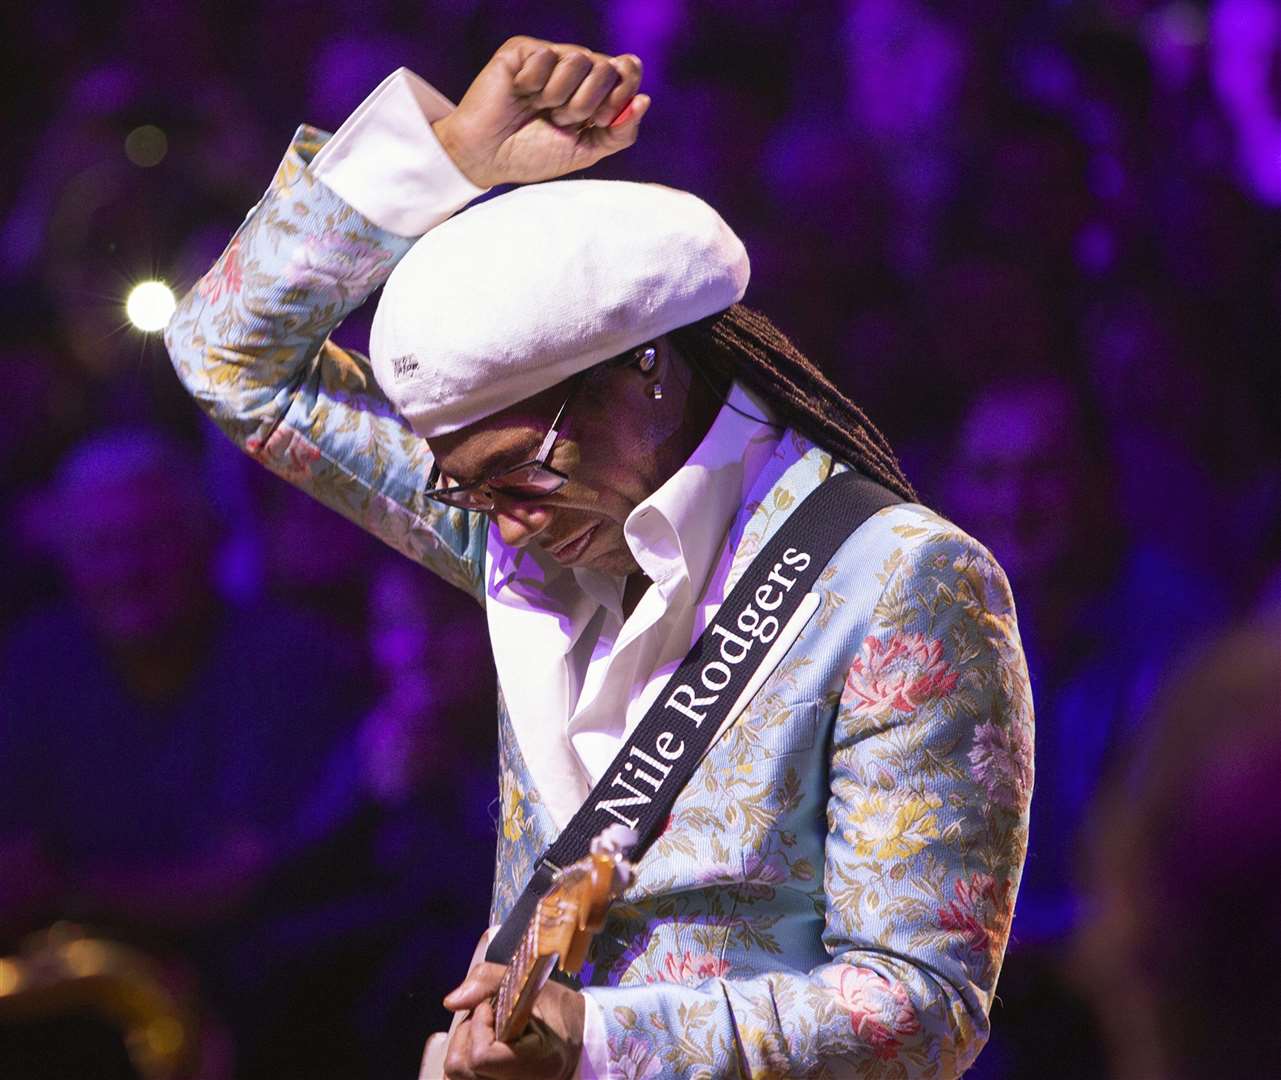 Nile Rodgers is headlining this year's Rochester Castle Concerts